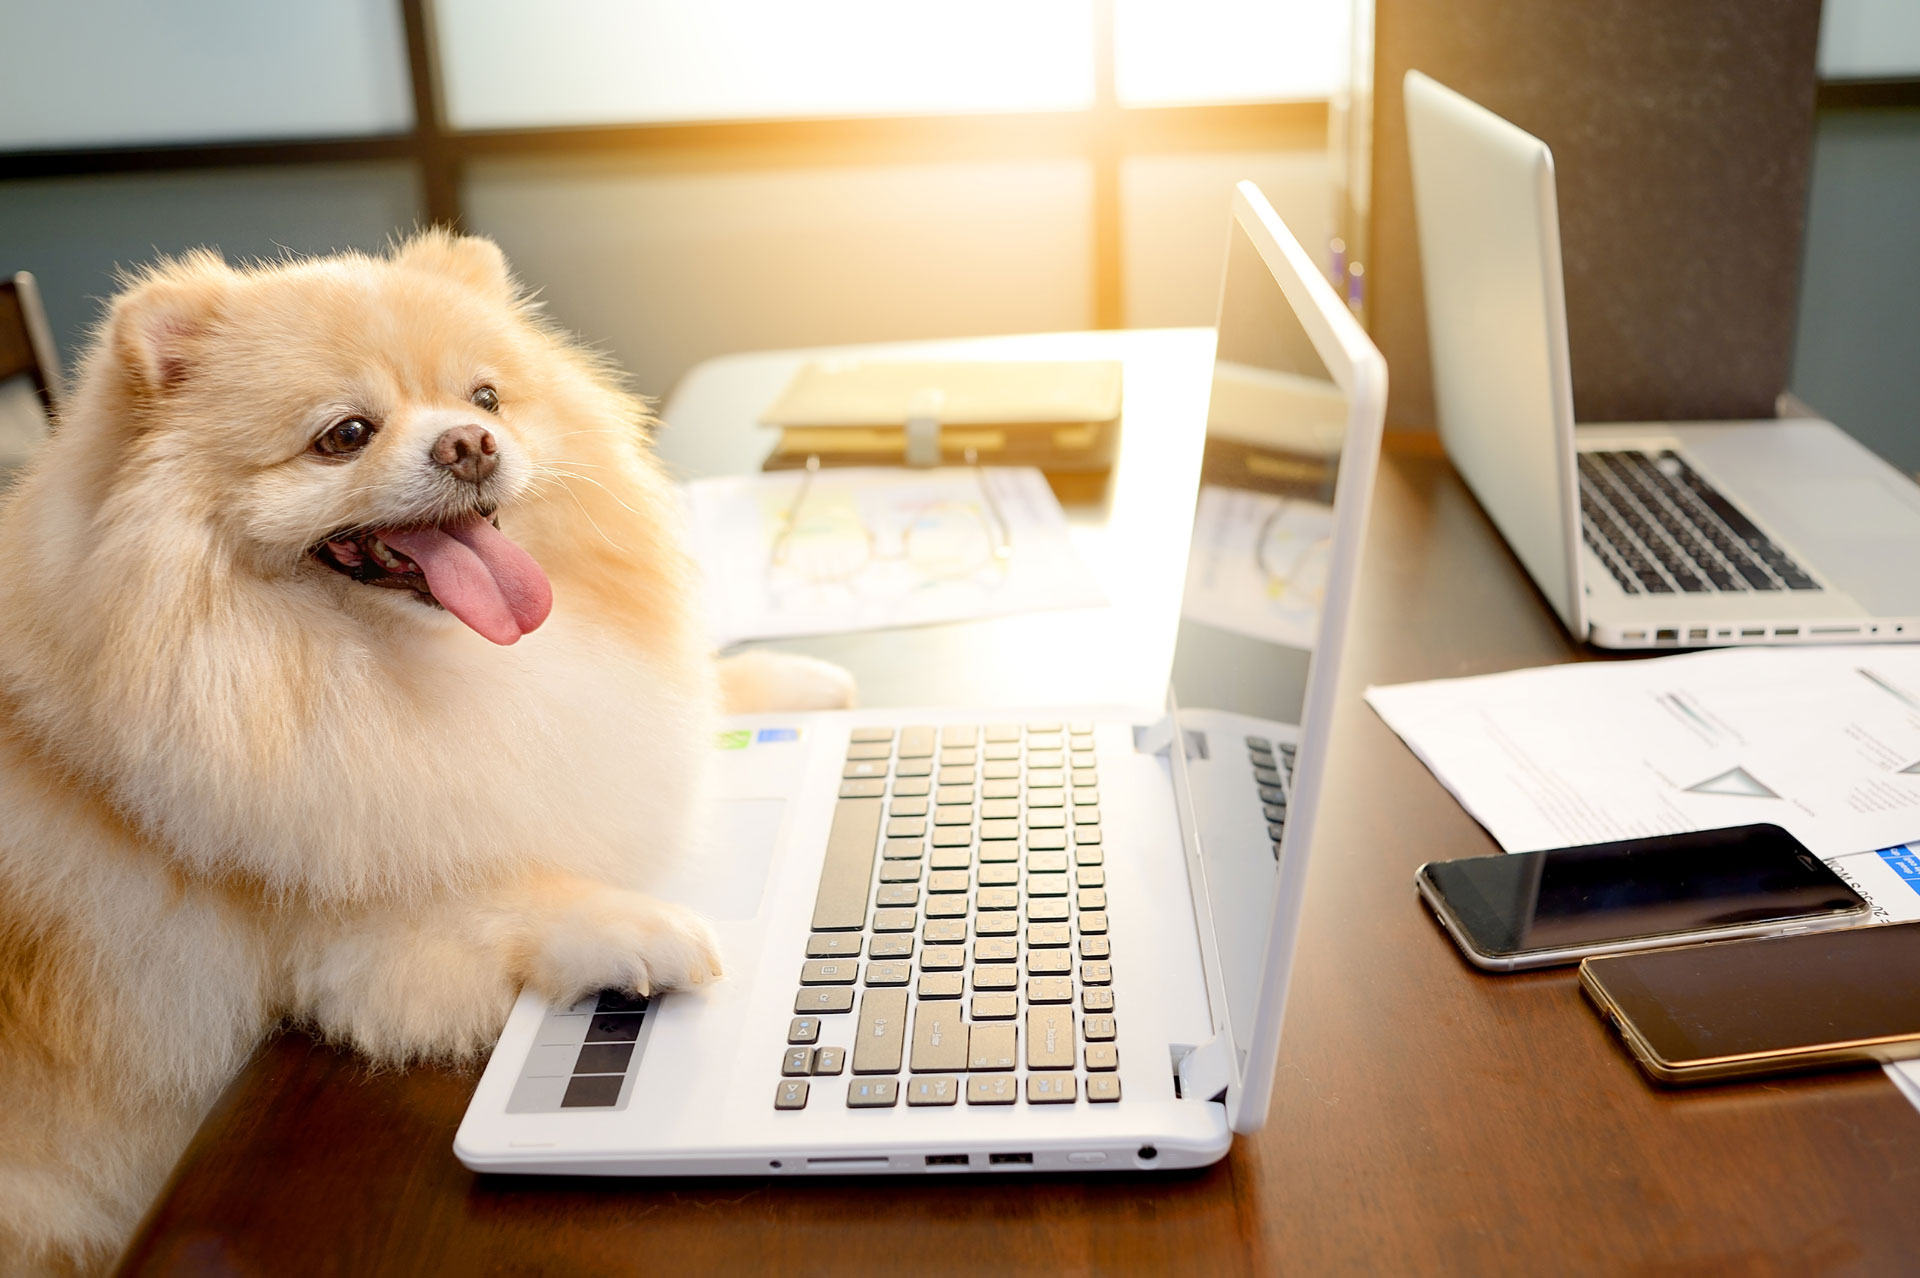 Dog sitting in front of a laptop with paws on the keyboard